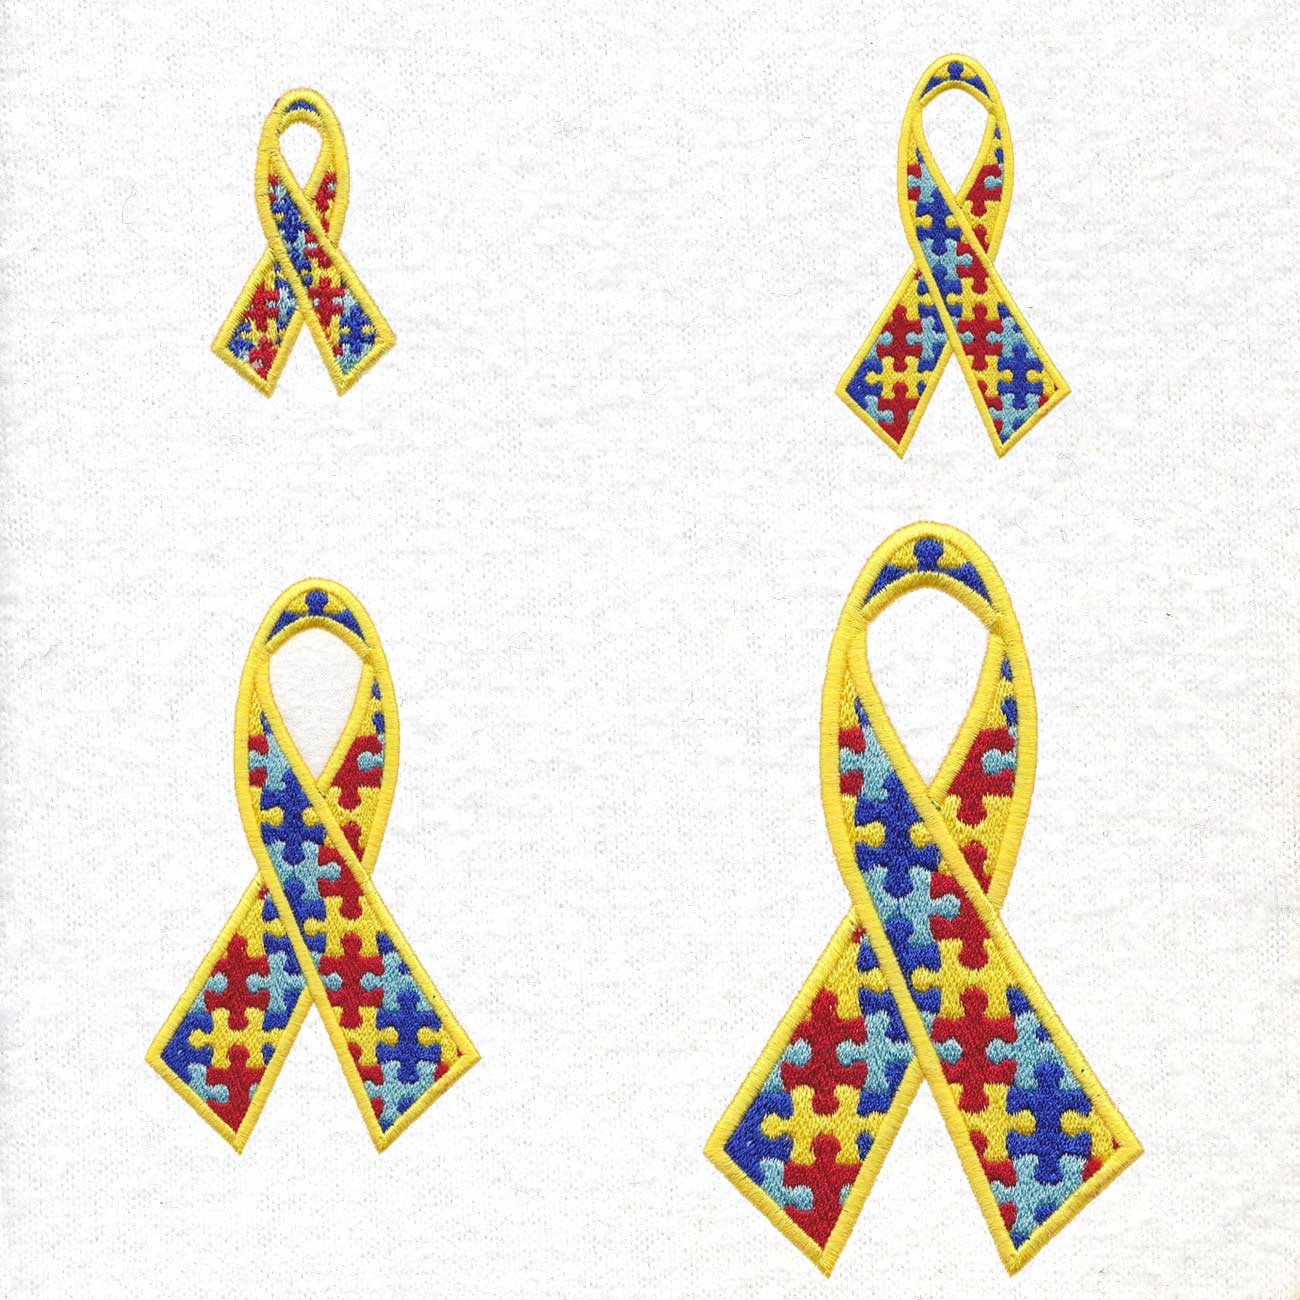 colored colorful puzzle detail puzzled support ribbon middle embroidery design support autism awareness set pack sizes